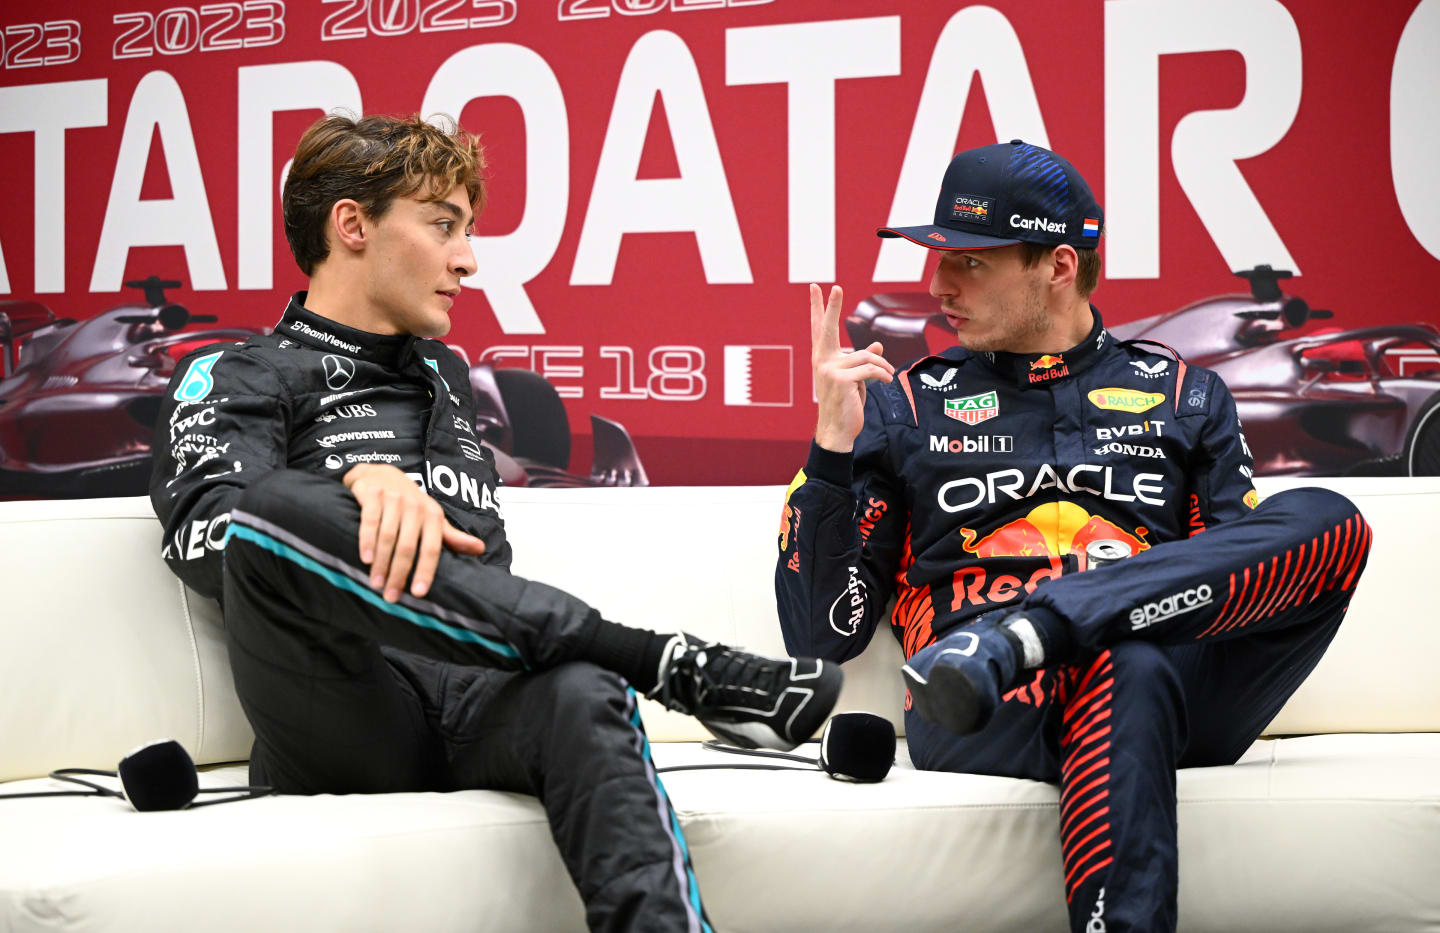 LUSAIL CITY, QATAR - OCTOBER 06: Pole position qualifier Max Verstappen of the Netherlands and Oracle Red Bull Racing and Second placed qualifier George Russell of Great Britain and Mercedes attend the press conference after qualifying ahead of the F1 Grand Prix of Qatar at Lusail International Circuit on October 06, 2023 in Lusail City, Qatar. (Photo by Clive Mason/Getty Images)